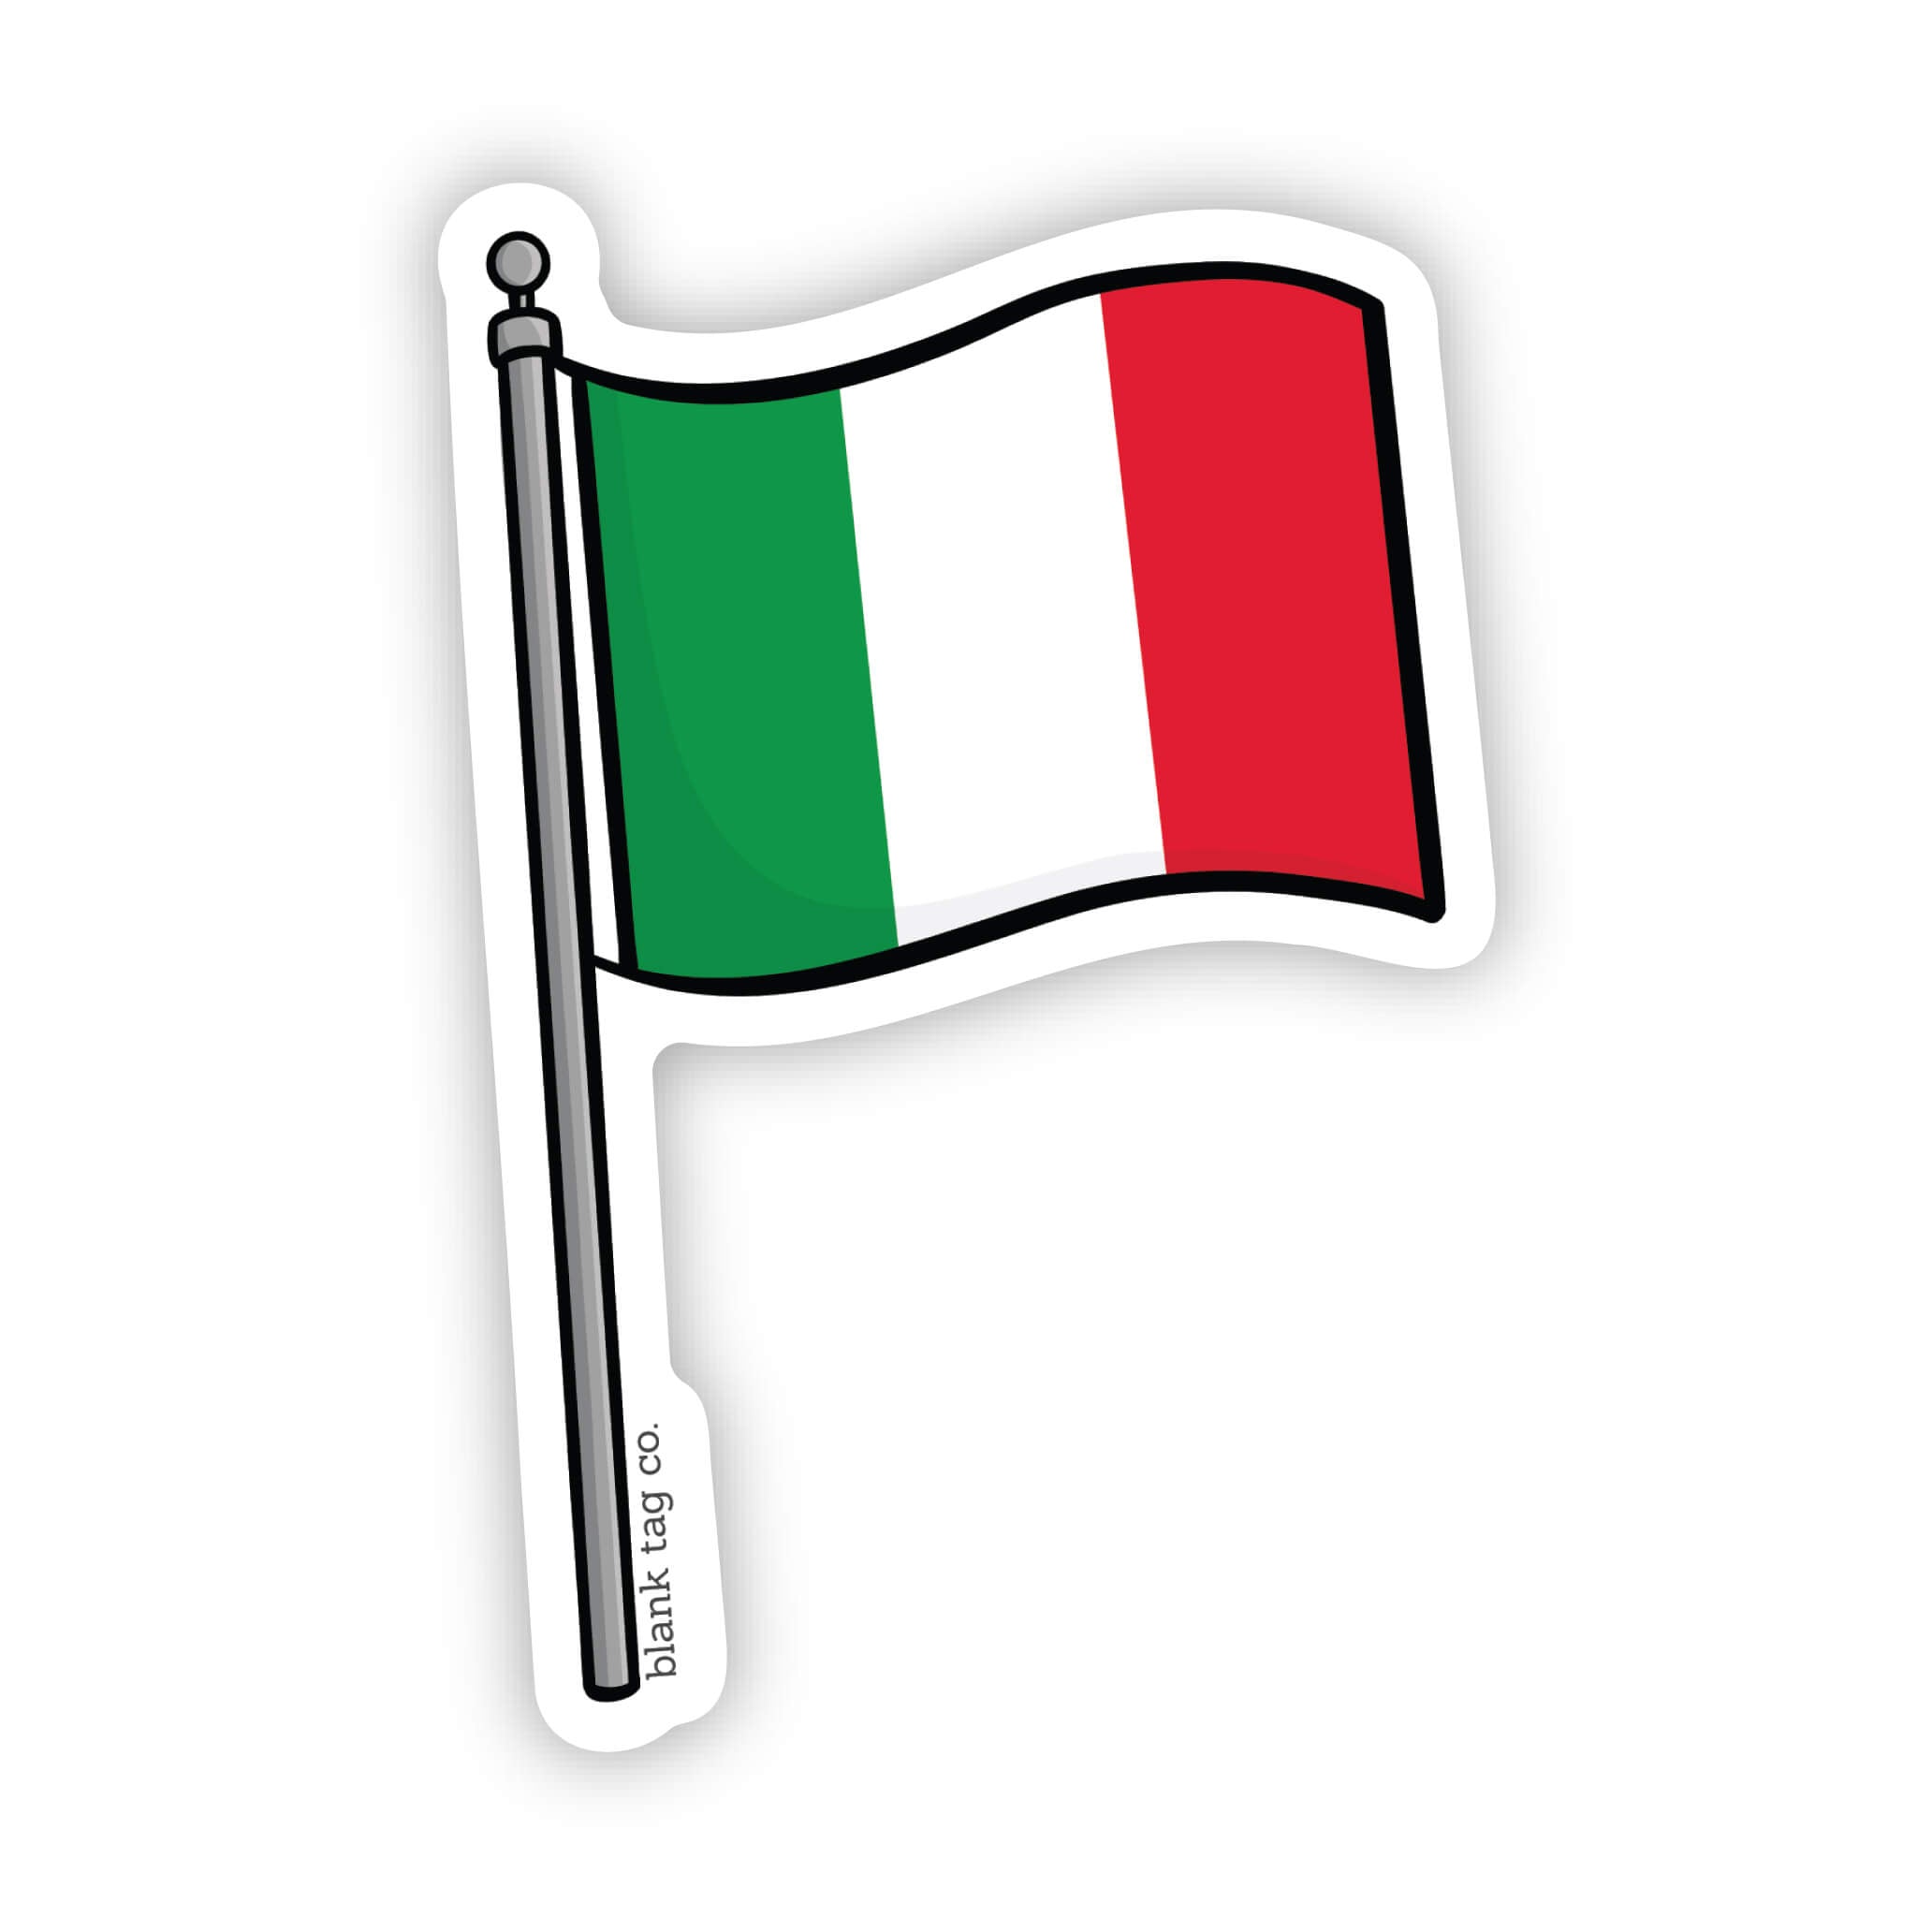 The Italy Flag Sticker